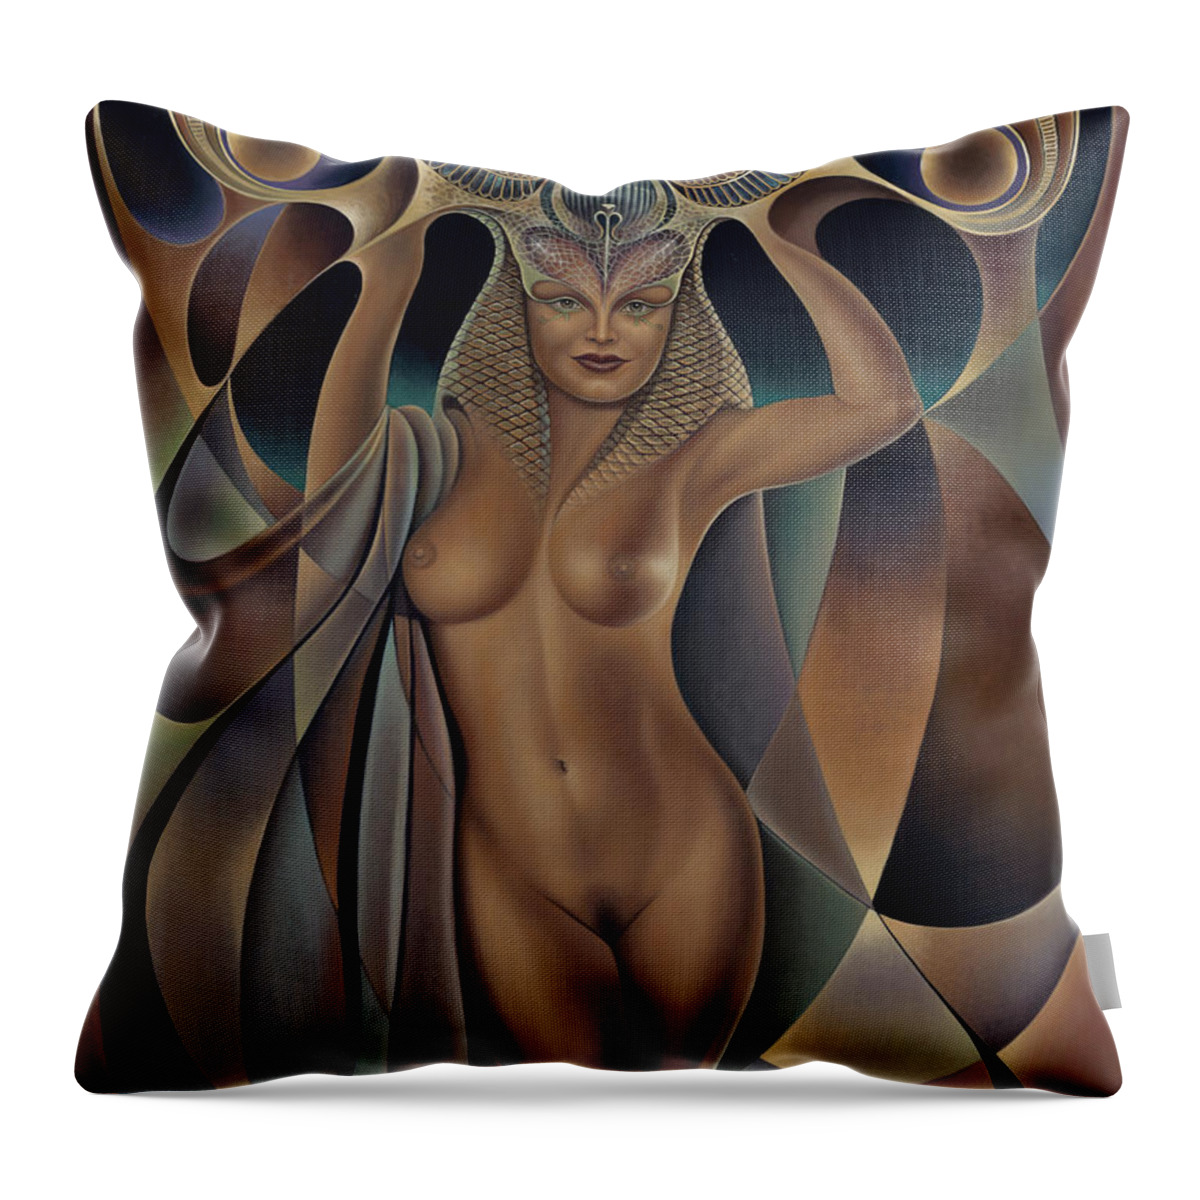 Nude-art Throw Pillow featuring the painting Dynamic Queen 5 by Ricardo Chavez-Mendez